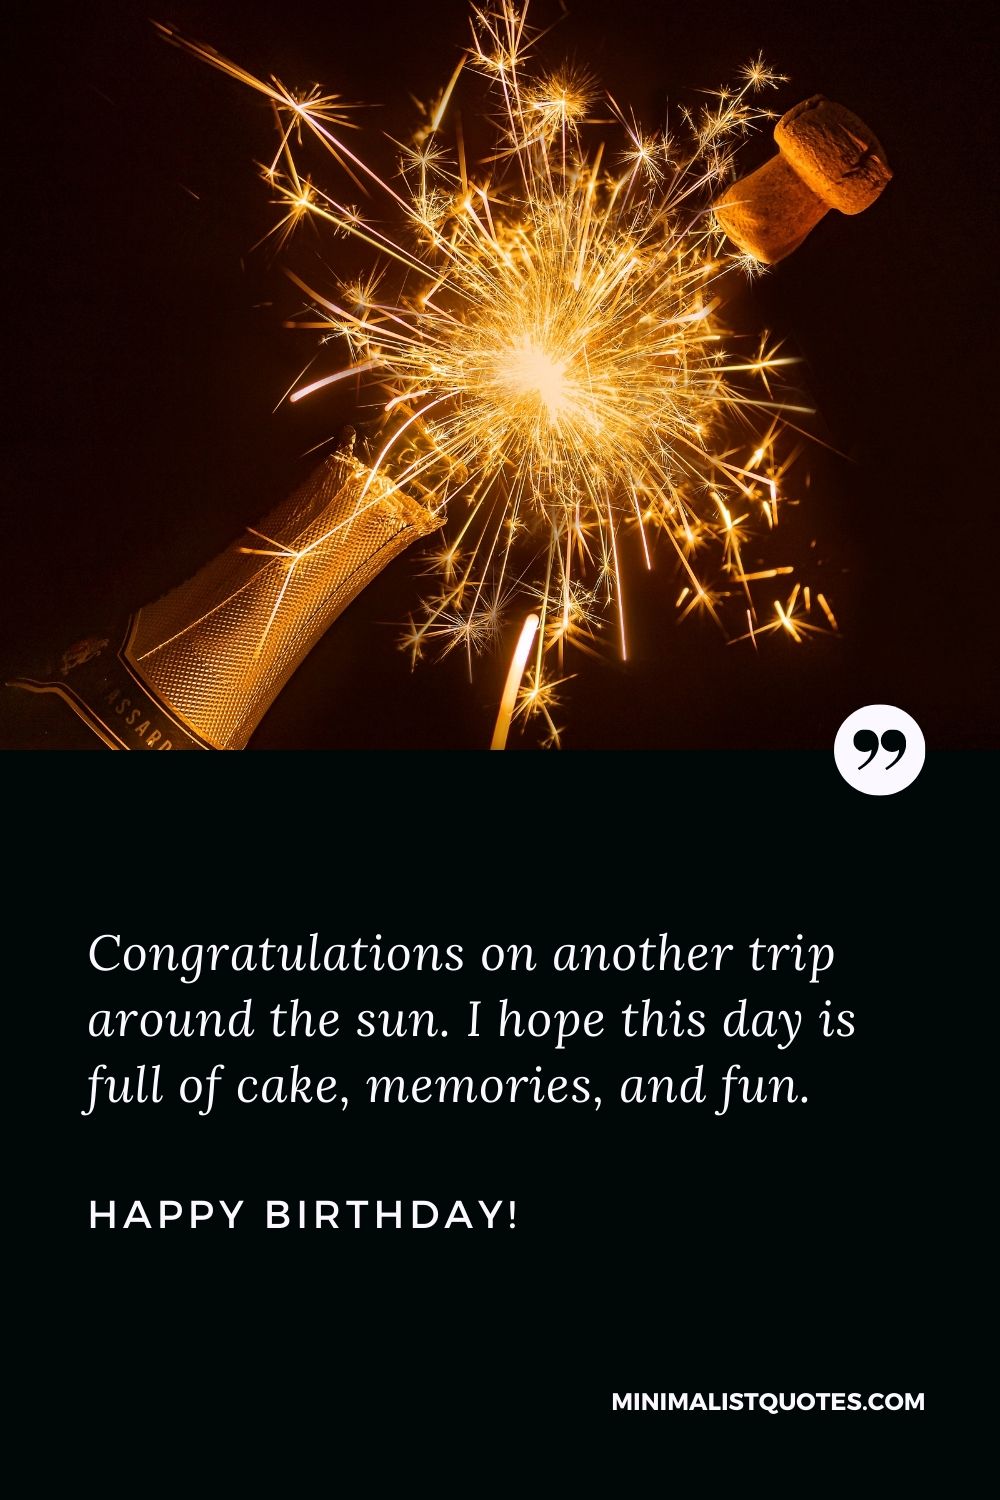 Birthday quotes for friend: Congratulations on another trip around the sun. I hope this day is full of cake, memories, and fun. Happy Birthday!